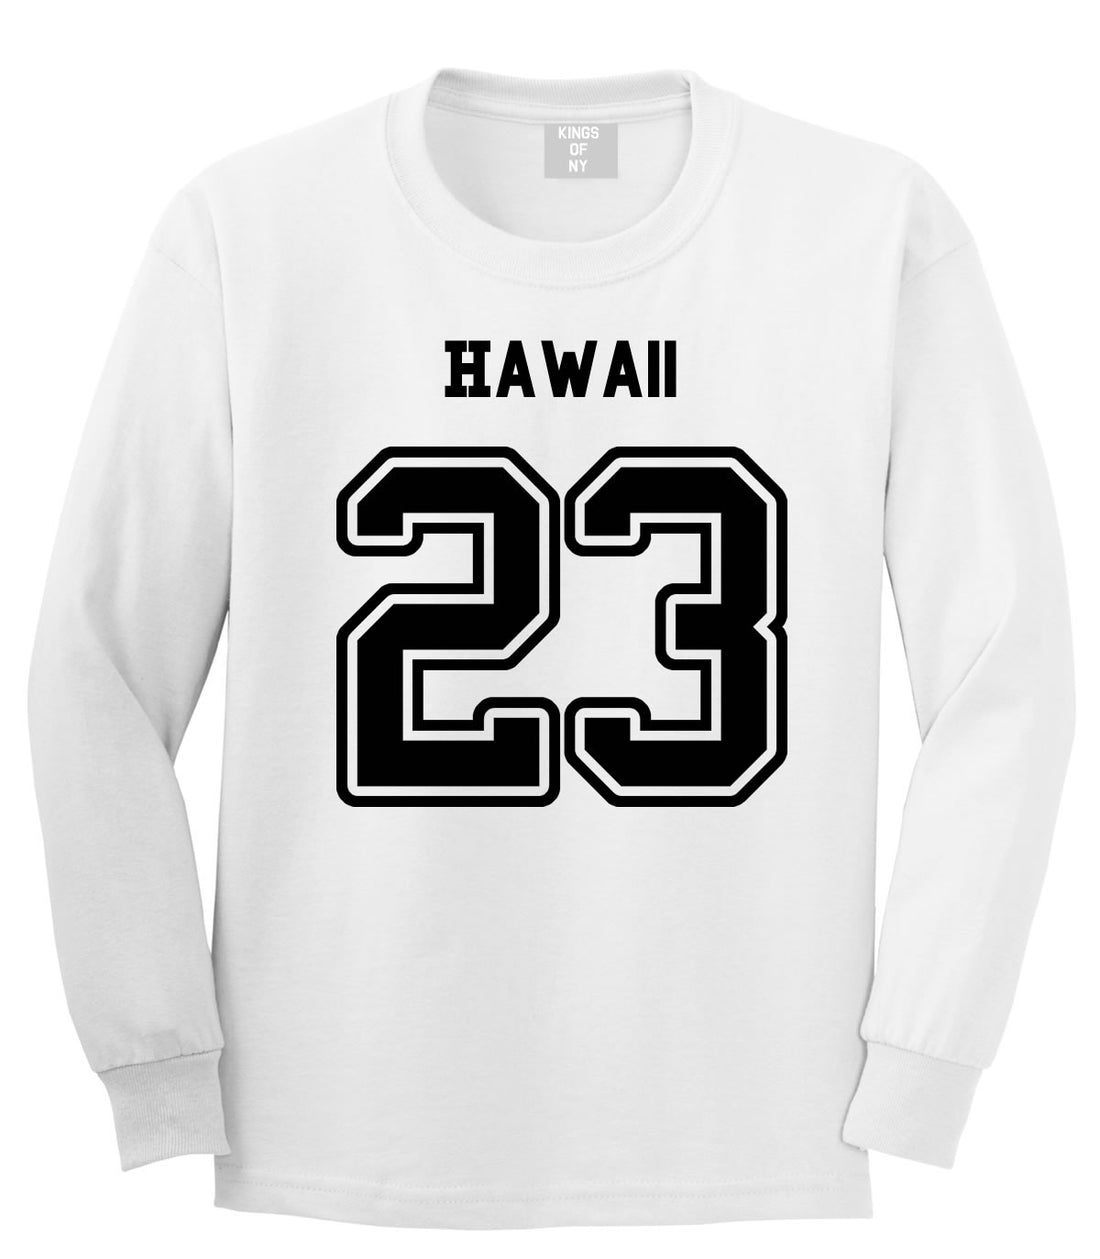 Sport Style Hawaii 23 Team State Jersey Long Sleeve T-Shirt By Kings Of NY